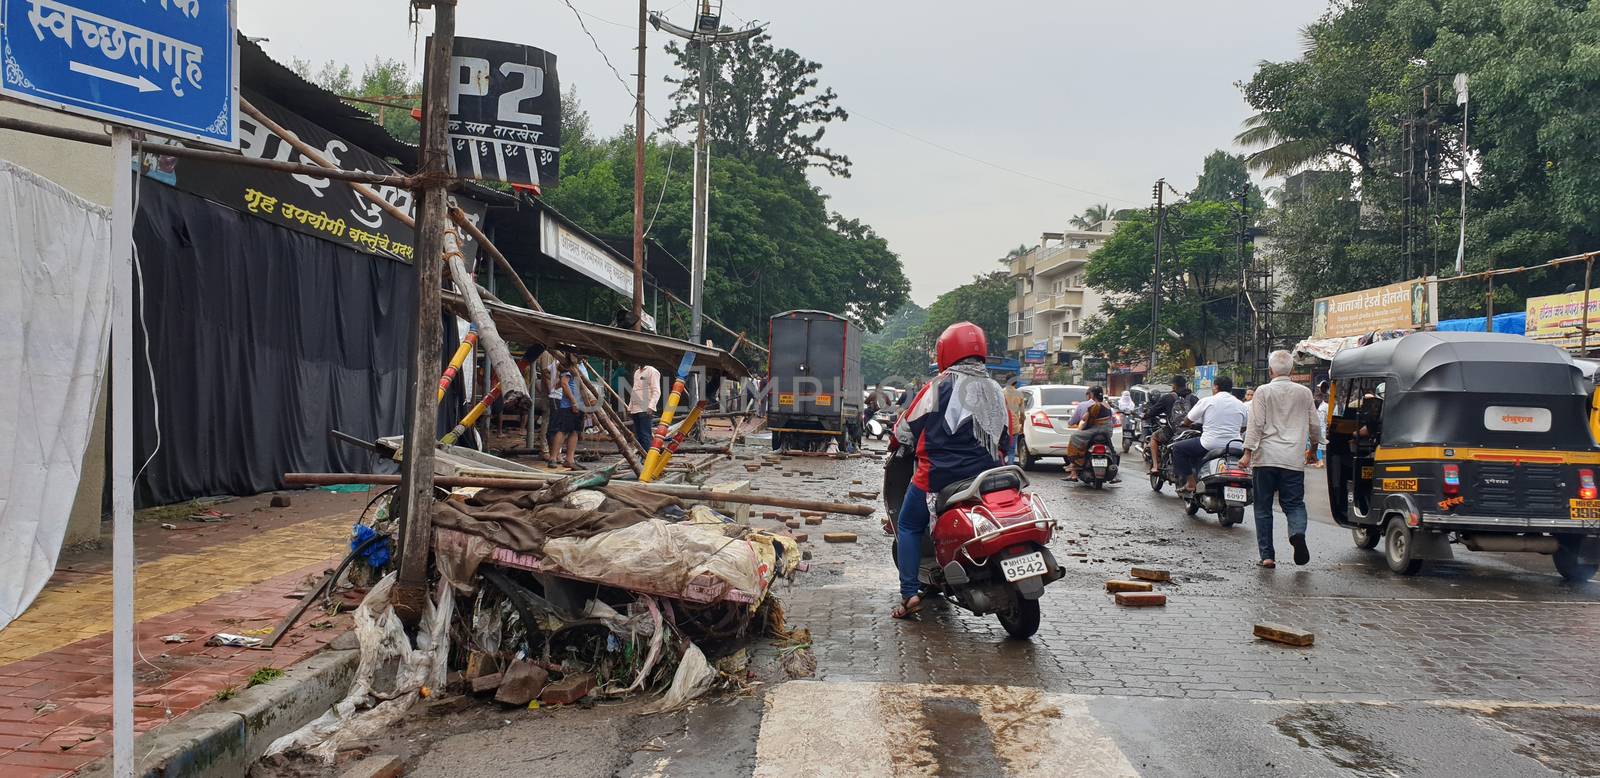 Pune, India - September 26, 2019: Sidewalks and road side cards destroyed in India due to floods during monsoons.